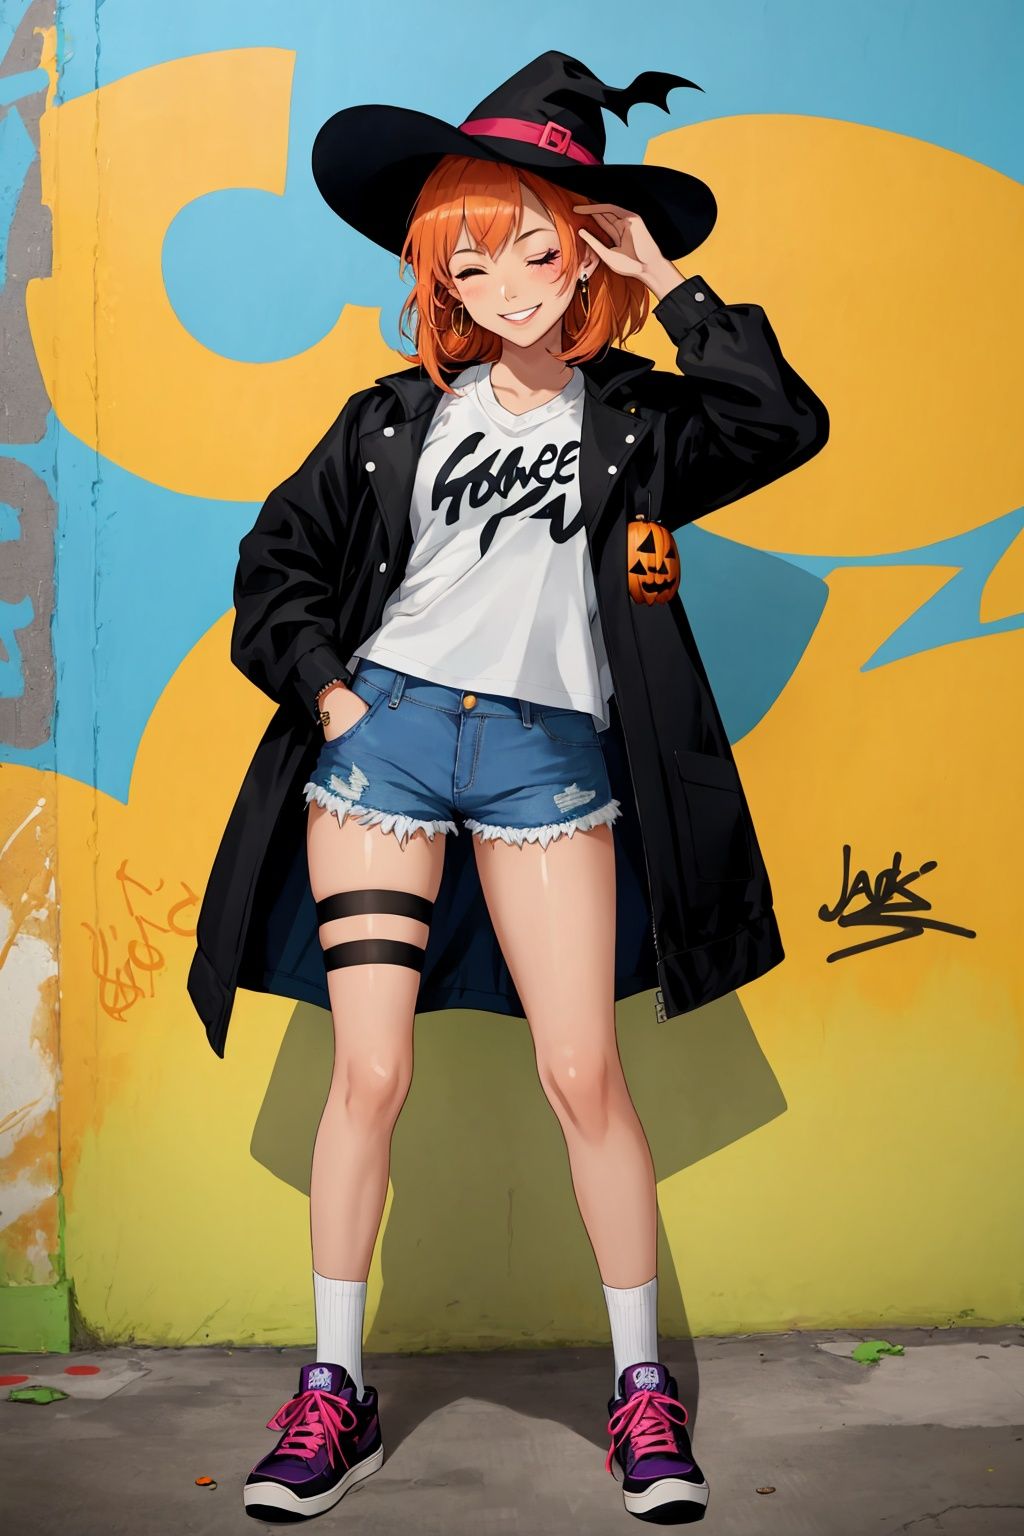  best quality,masterpiece,illustration,earrings,bodypaint,hand in pocket,Denim shorts,(black silk stockings),smile,(one eye closed),an extremely delicate and beautiful,extremely detailed,CG,unity,8k,wallpaper,Amazing,finely detail,1 girl, solo, street, graffiti,white shirt, denim jacket, denim shorts, sneakers,(spray painting),(graffiti on the wall),(graffiti), hip-hop, street culture, Halloween, jack-o'-lantern, bat, bat, Tombstone, Best quality, 8k